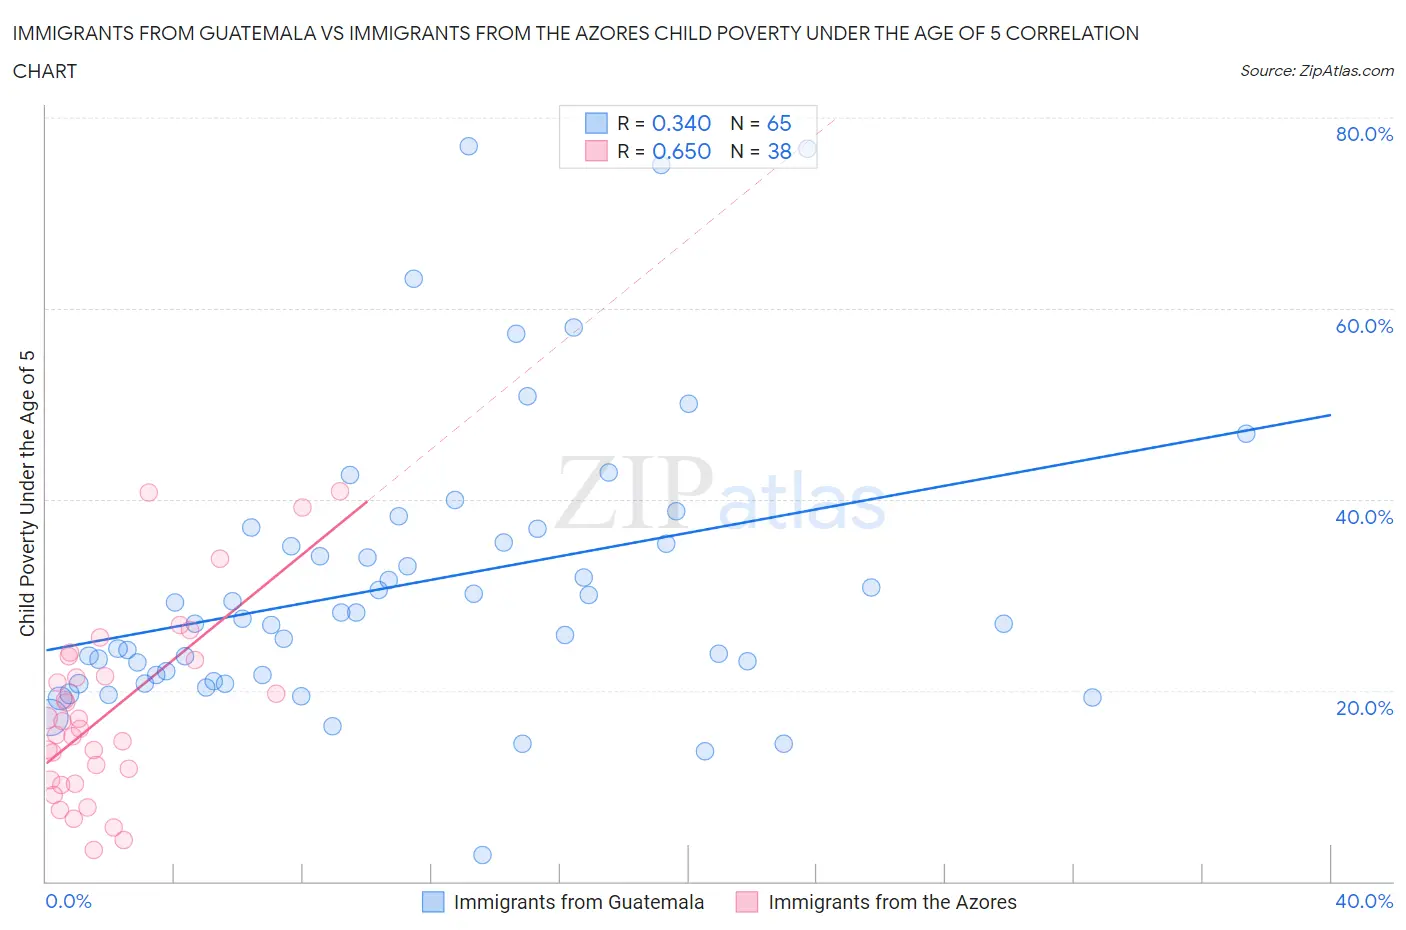 Immigrants from Guatemala vs Immigrants from the Azores Child Poverty Under the Age of 5